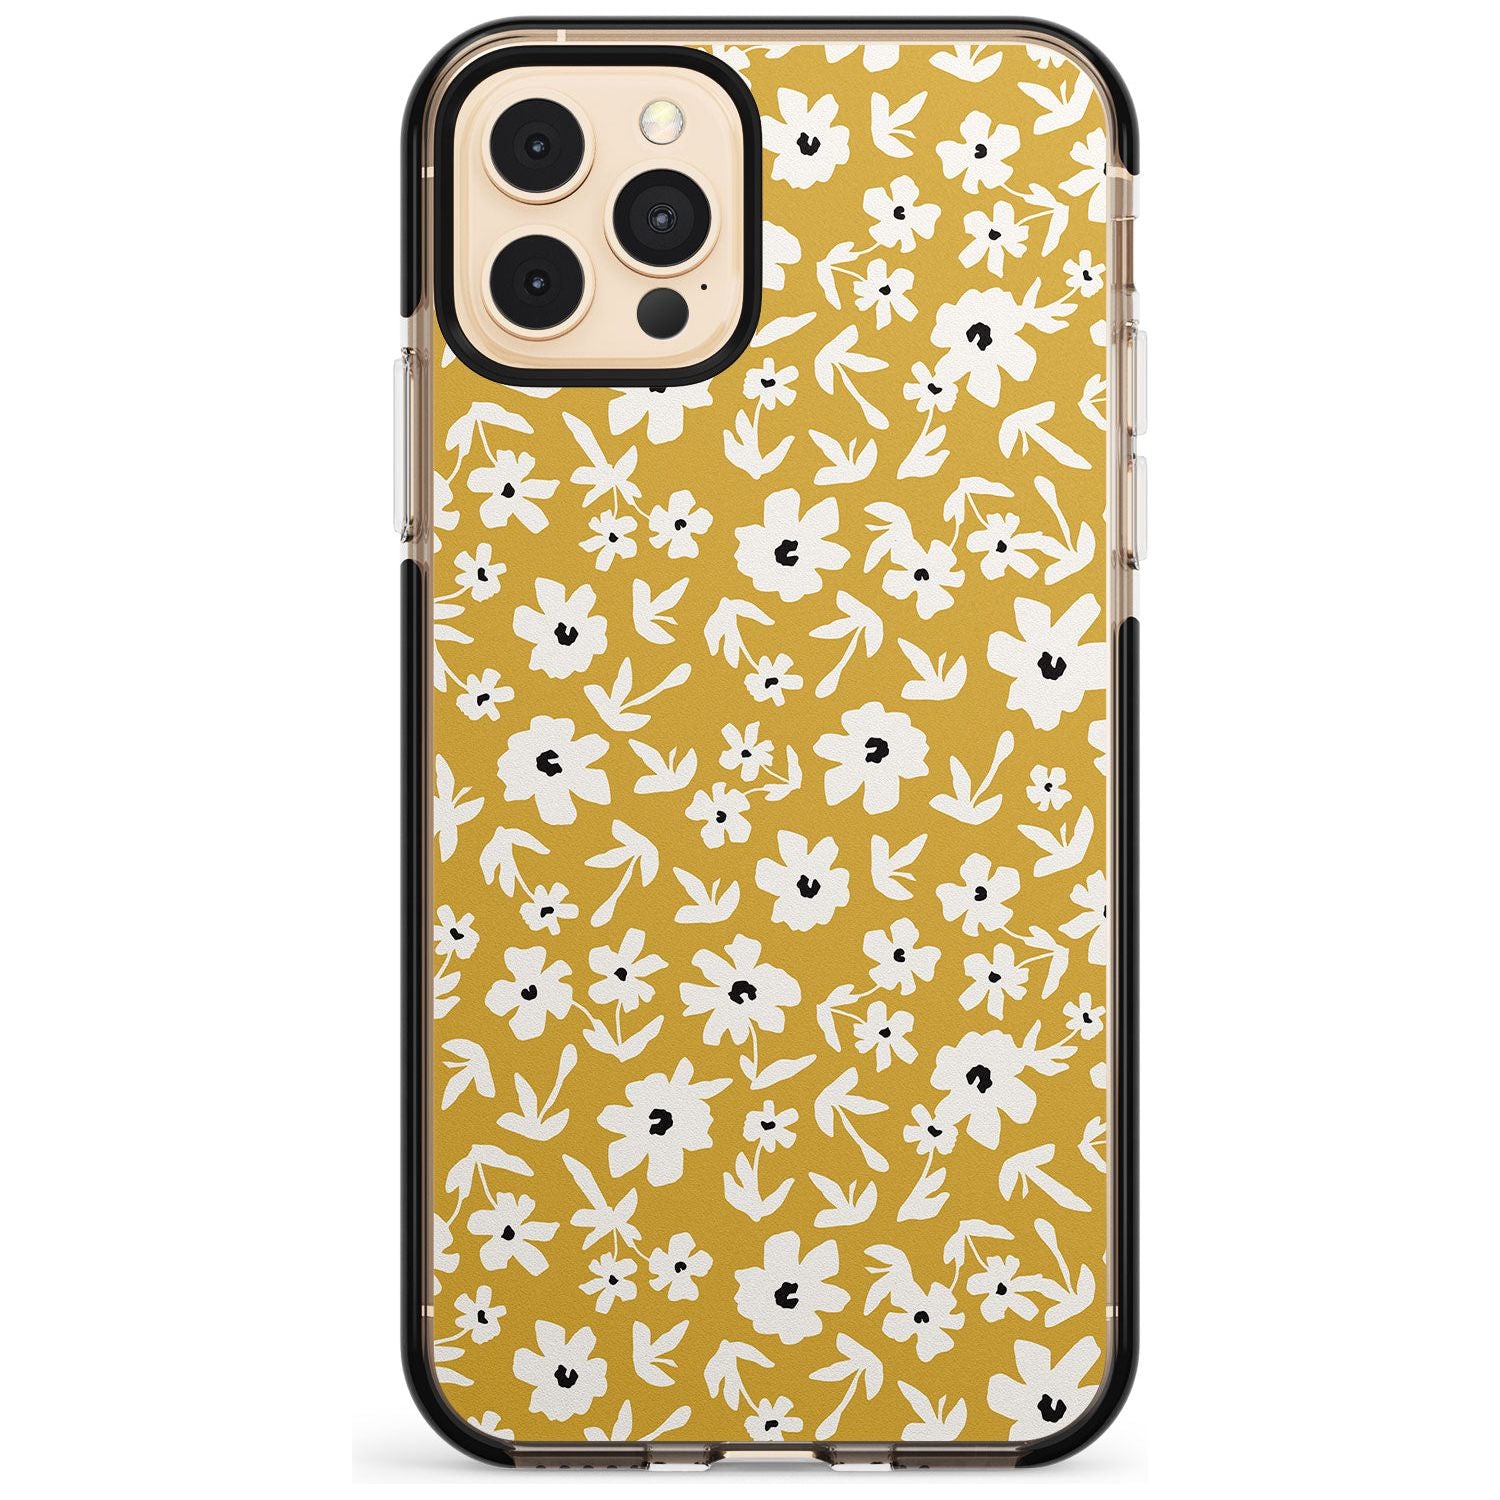 Floral Print on Mustard - Cute Floral Design Pink Fade Impact Phone Case for iPhone 11